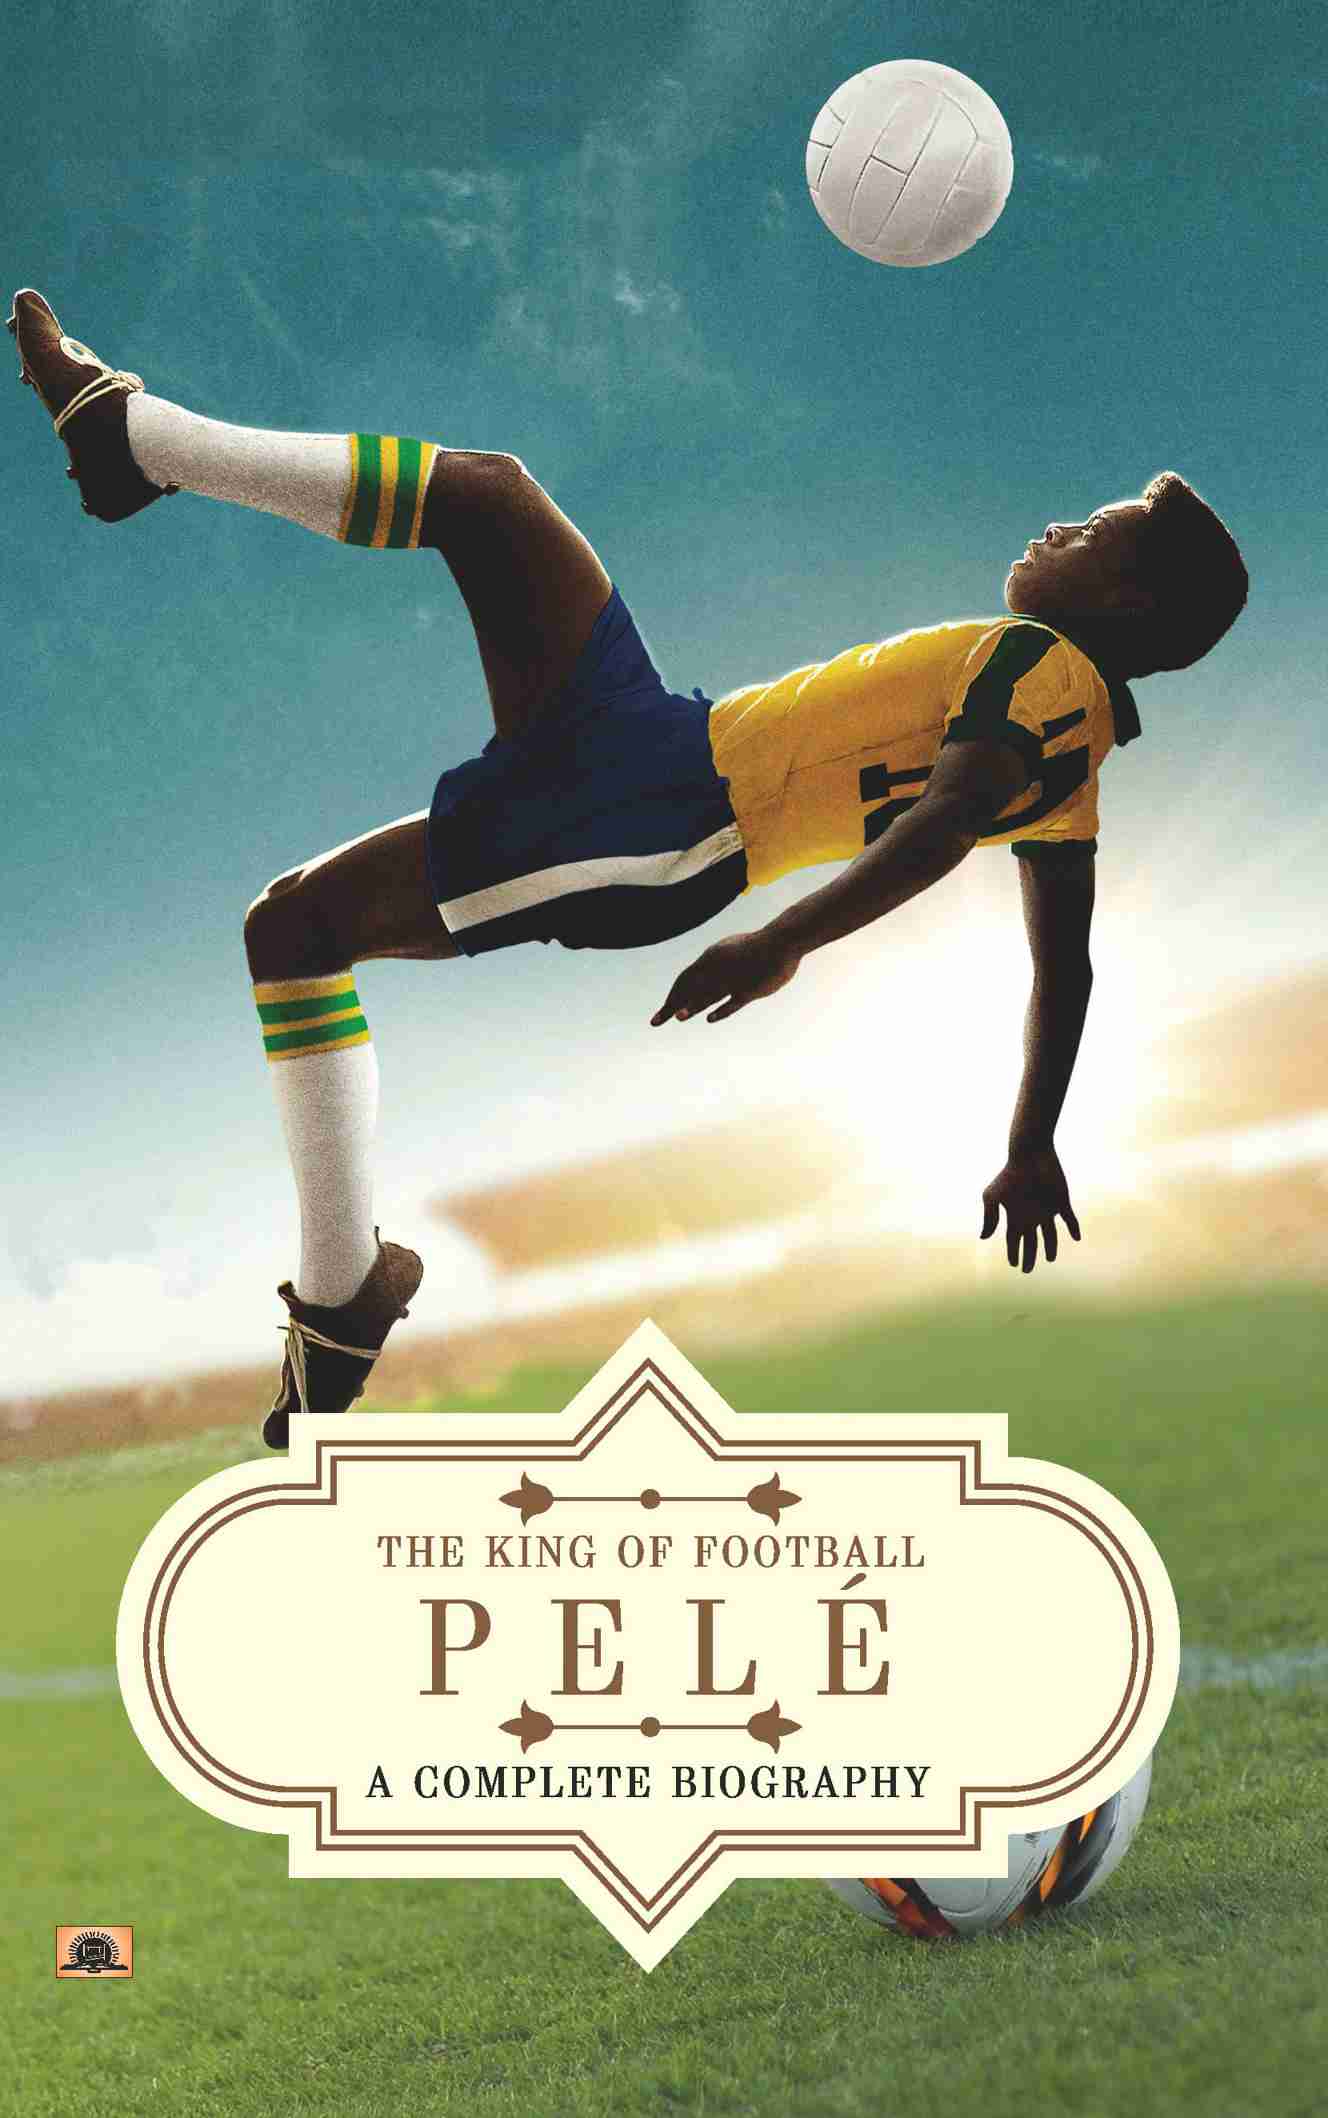 Pelé: A Complete Biography (The King of Football)